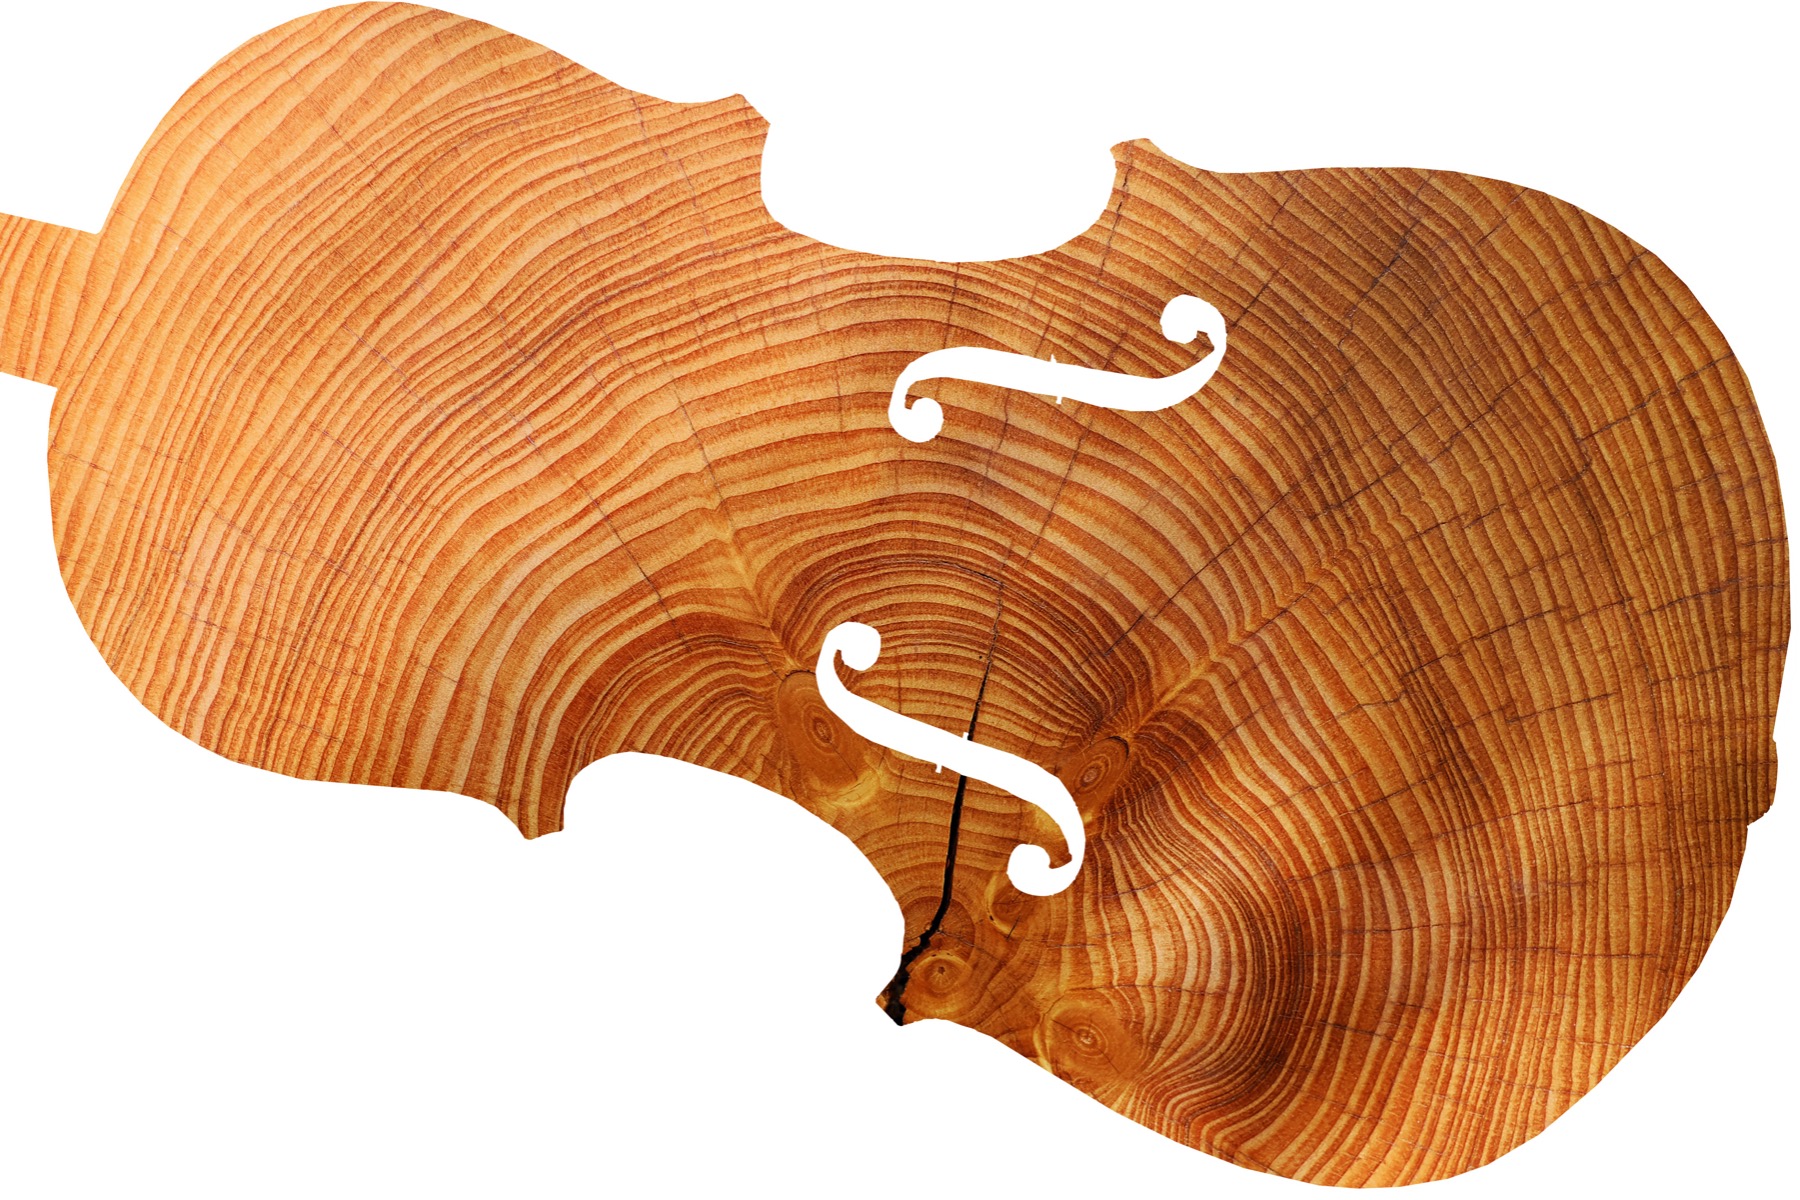 violin shape over a wood trunk cross section